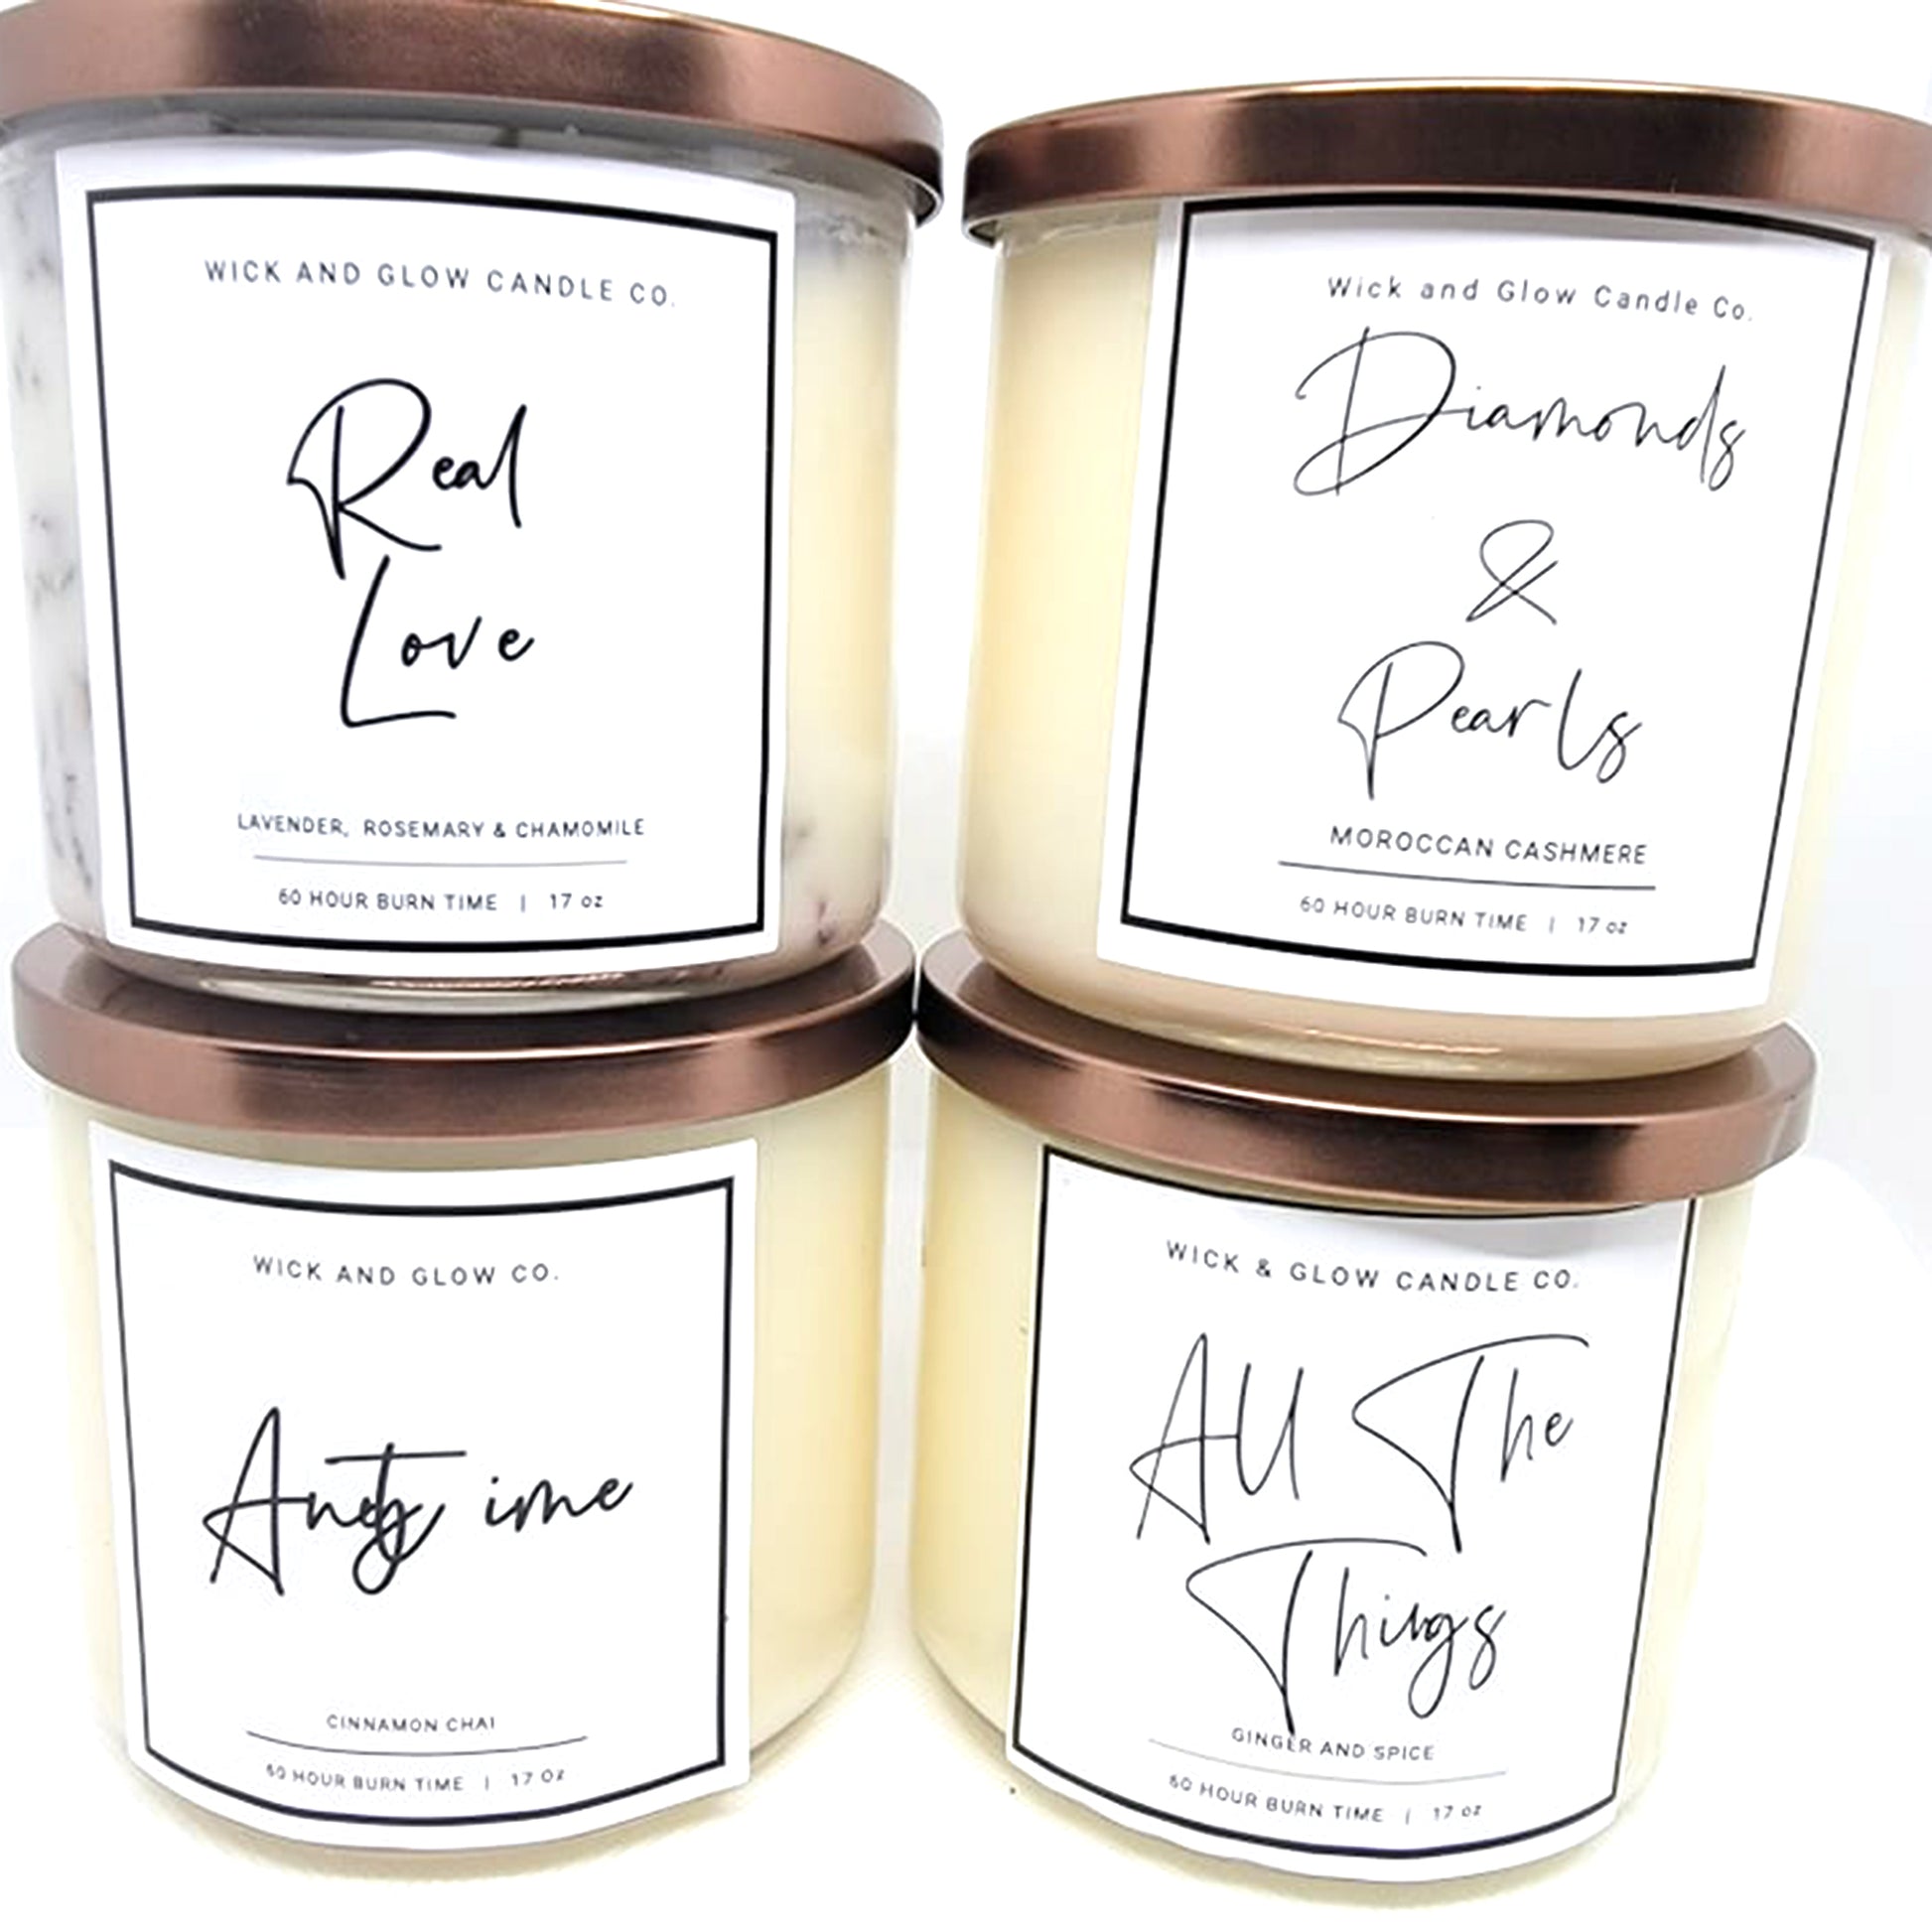 Real Love - Lavender, Rosemary and Chamomile Luxury Scented Candle - The Wick and Glow Candle Company